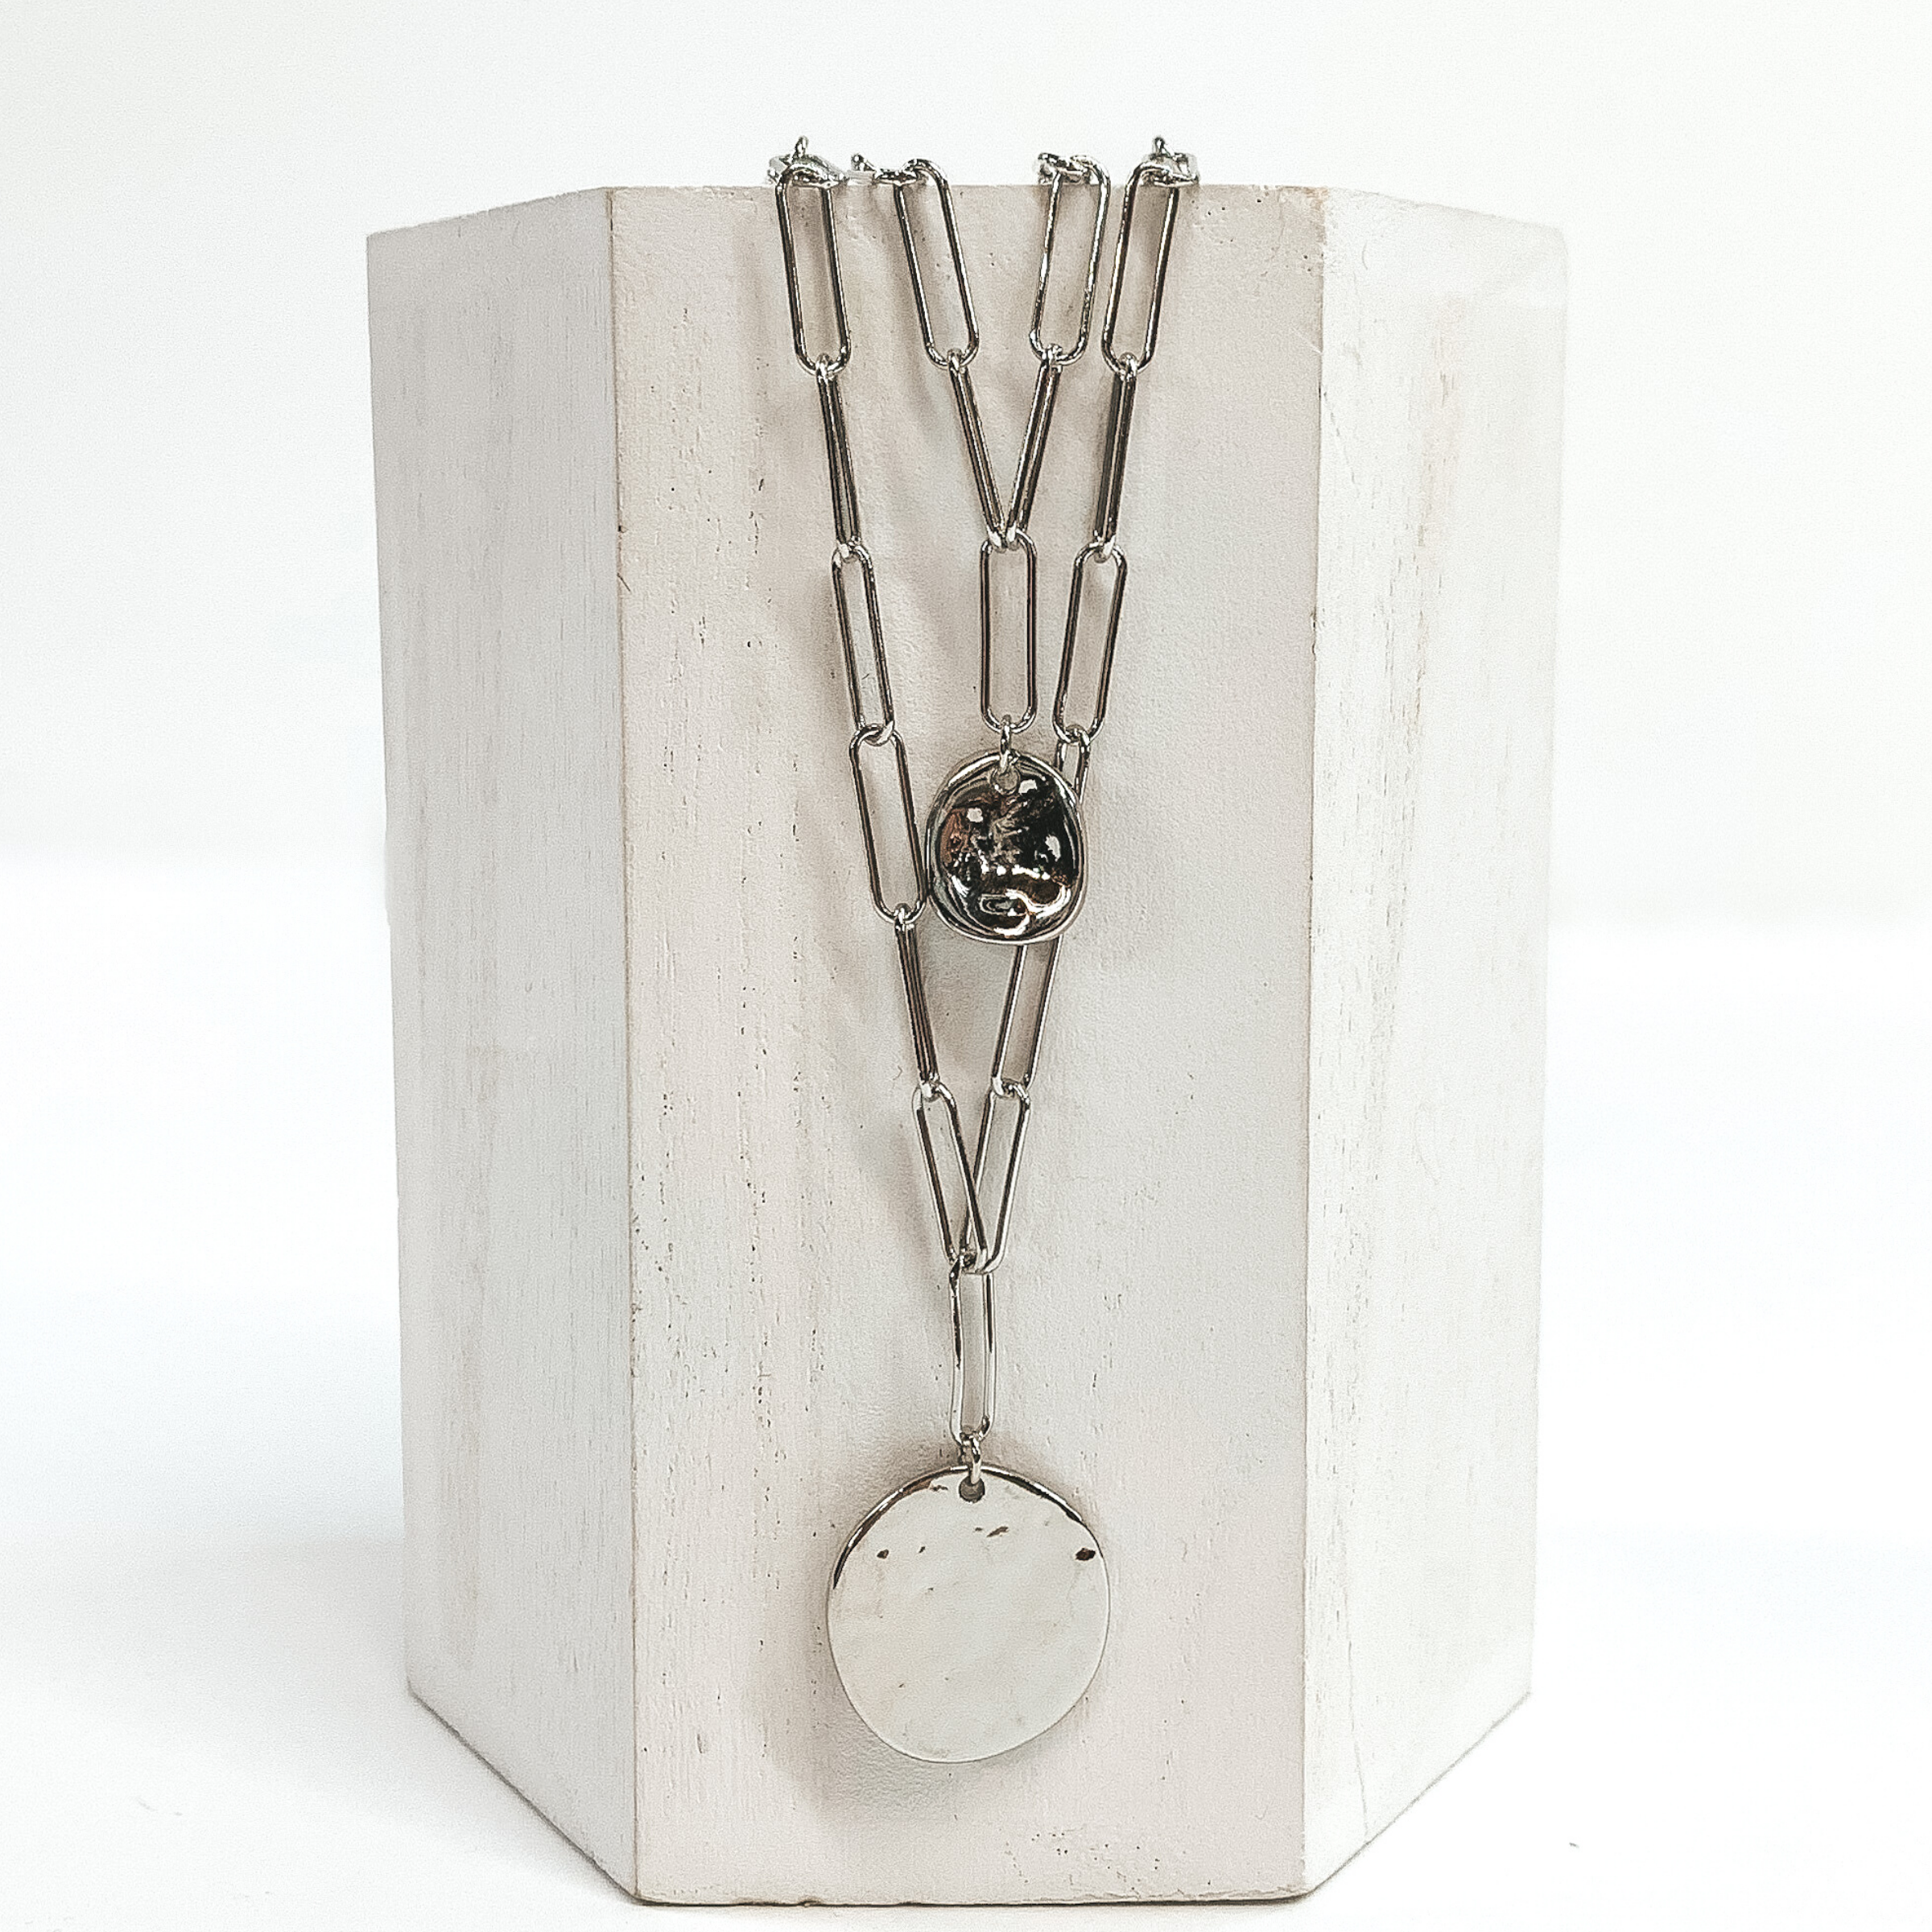 Double layered silver chain necklace with two circle pendants. The pendants have a hammered texture and there is a small one on the shorter strand and a bigger circle on the longer strand. This necklace is pictured on a white block with a white background. 